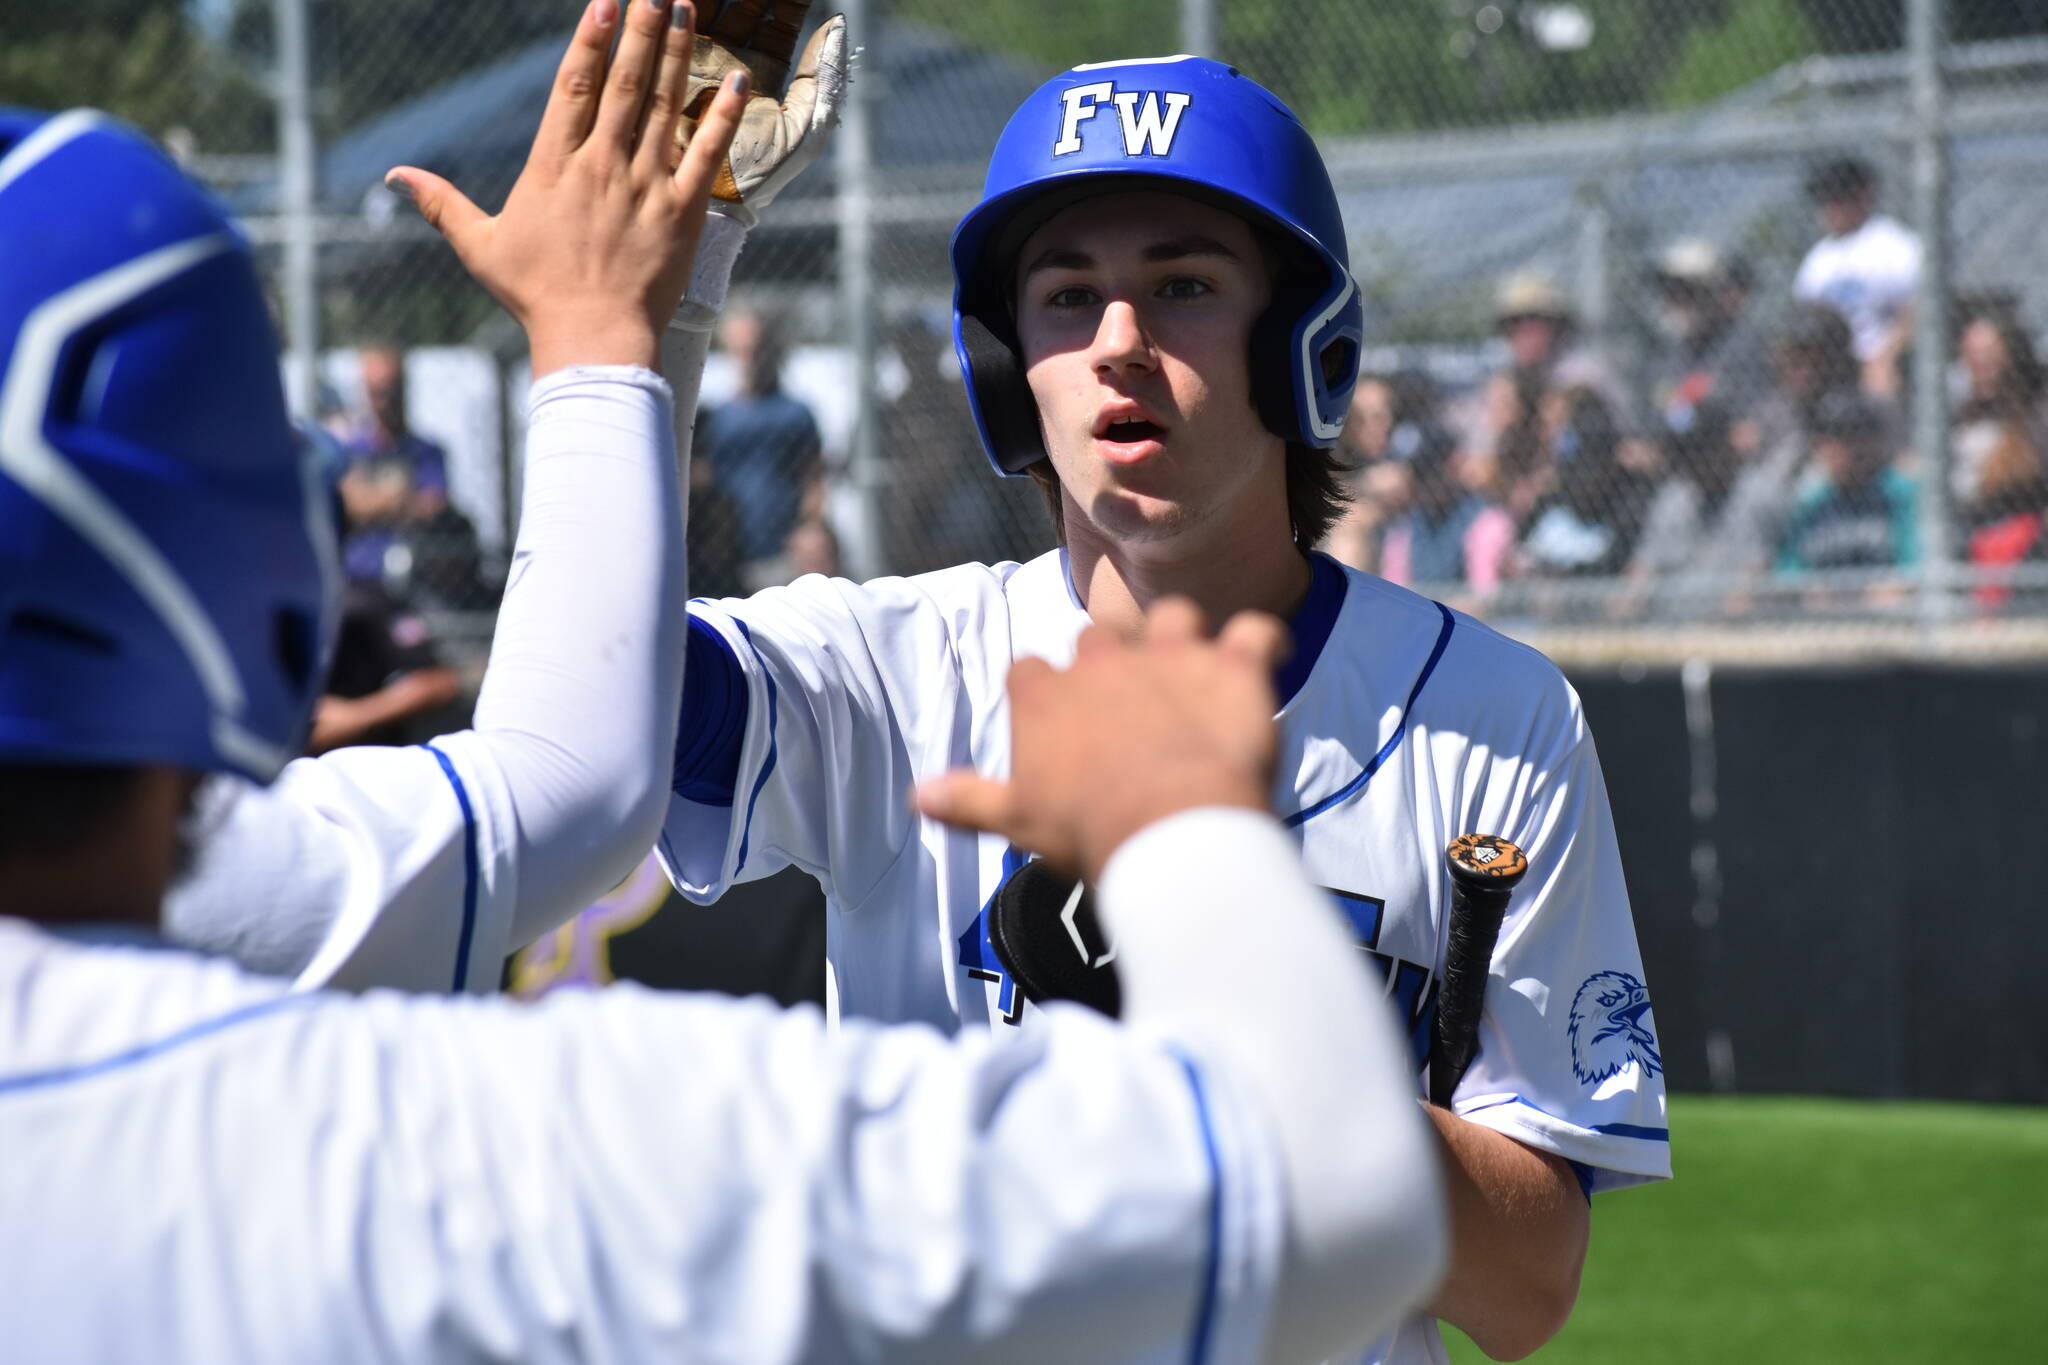 Jay O’Neill gets a lot of high fives as he scores the second run of the game for the Eagles. Ben Ray / The Mirror